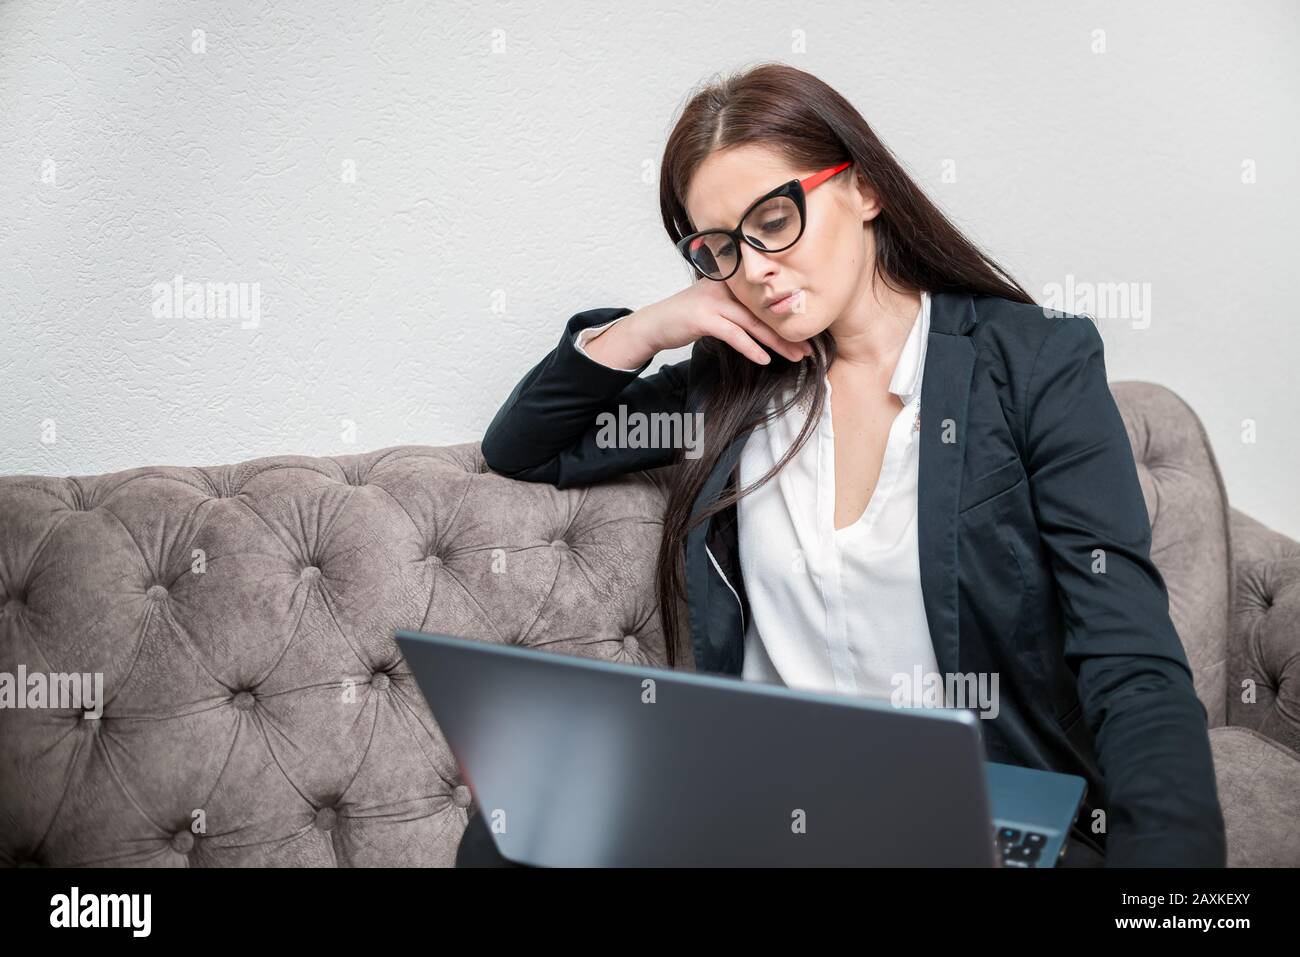 Businesswoman thinking about investments on laptop at home office Stock Photo